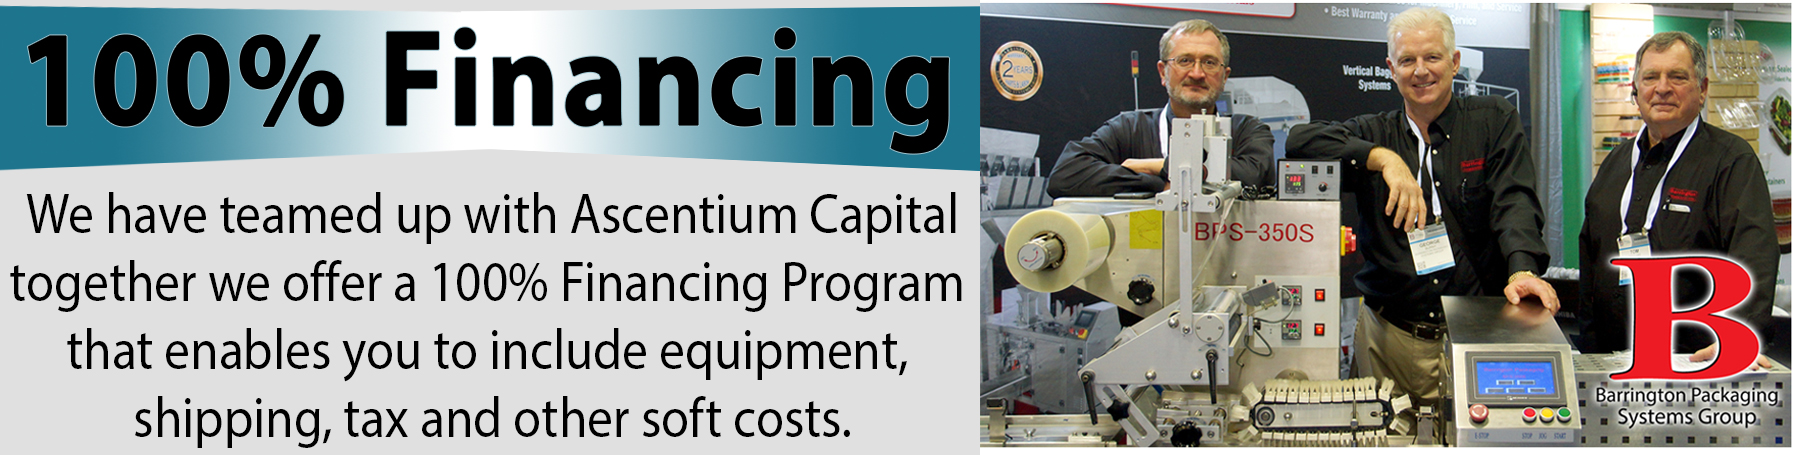 Packaging Equipment Financing and Leasing Options 888-814-7999 Barrington Packaging offers affordable packaging equipment, high-quality packaging systems, new and used solutions for all of your packaging equipment needs